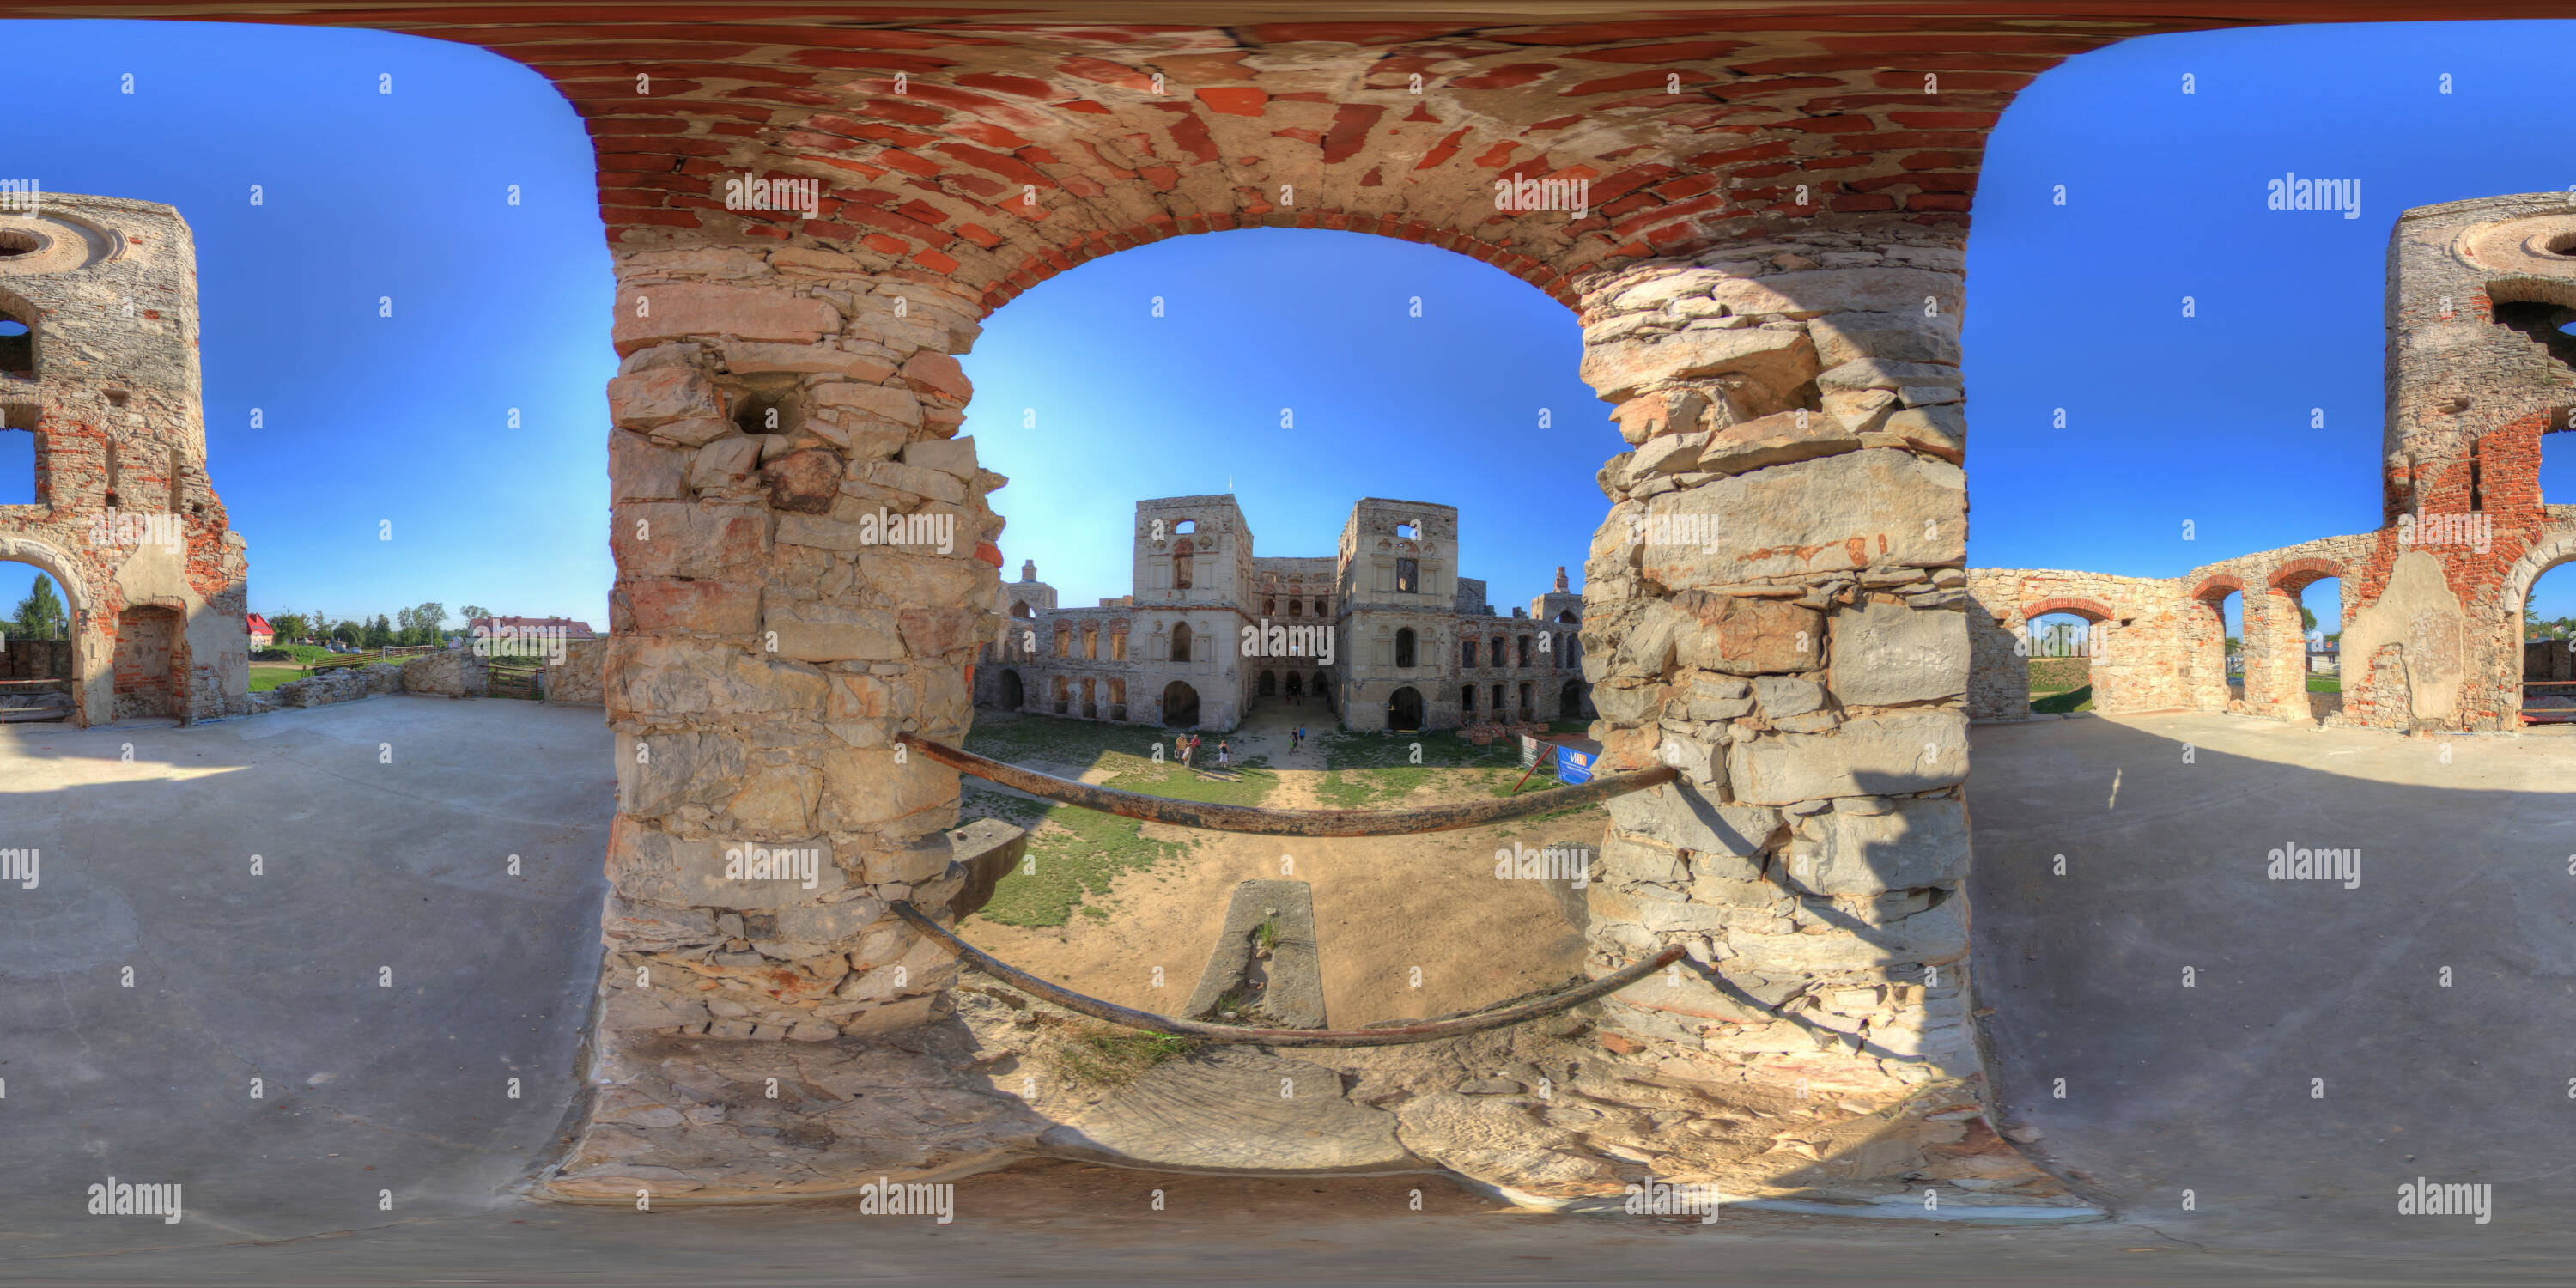 360 degree panoramic view of Ruins Of Krzyztopor, Ossolinski's Palace (126)